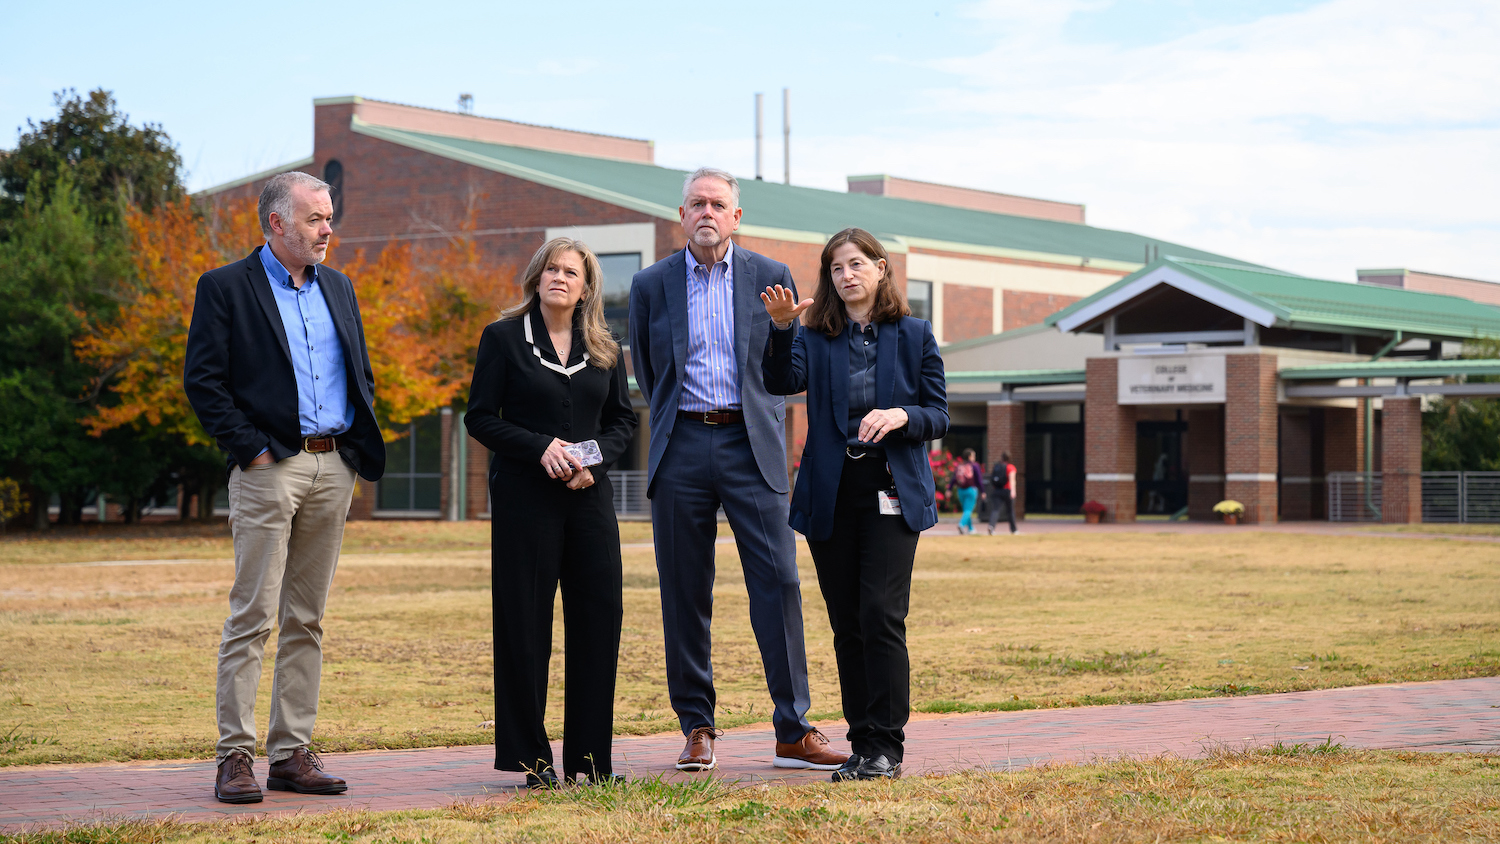 Dr. Kate Meurs, far right, takes Dr. Stuart Fitzgerald, chief scientific officer at TriviumVet, Dr. Dottie Cimino Brown, chief scientific officer at Mars Veterinary Health, and Dr. Mike McFarland, executive vice president and chief medical officer at Zoetis, on a tour of the NC State College of Veterinary Medicine campus.